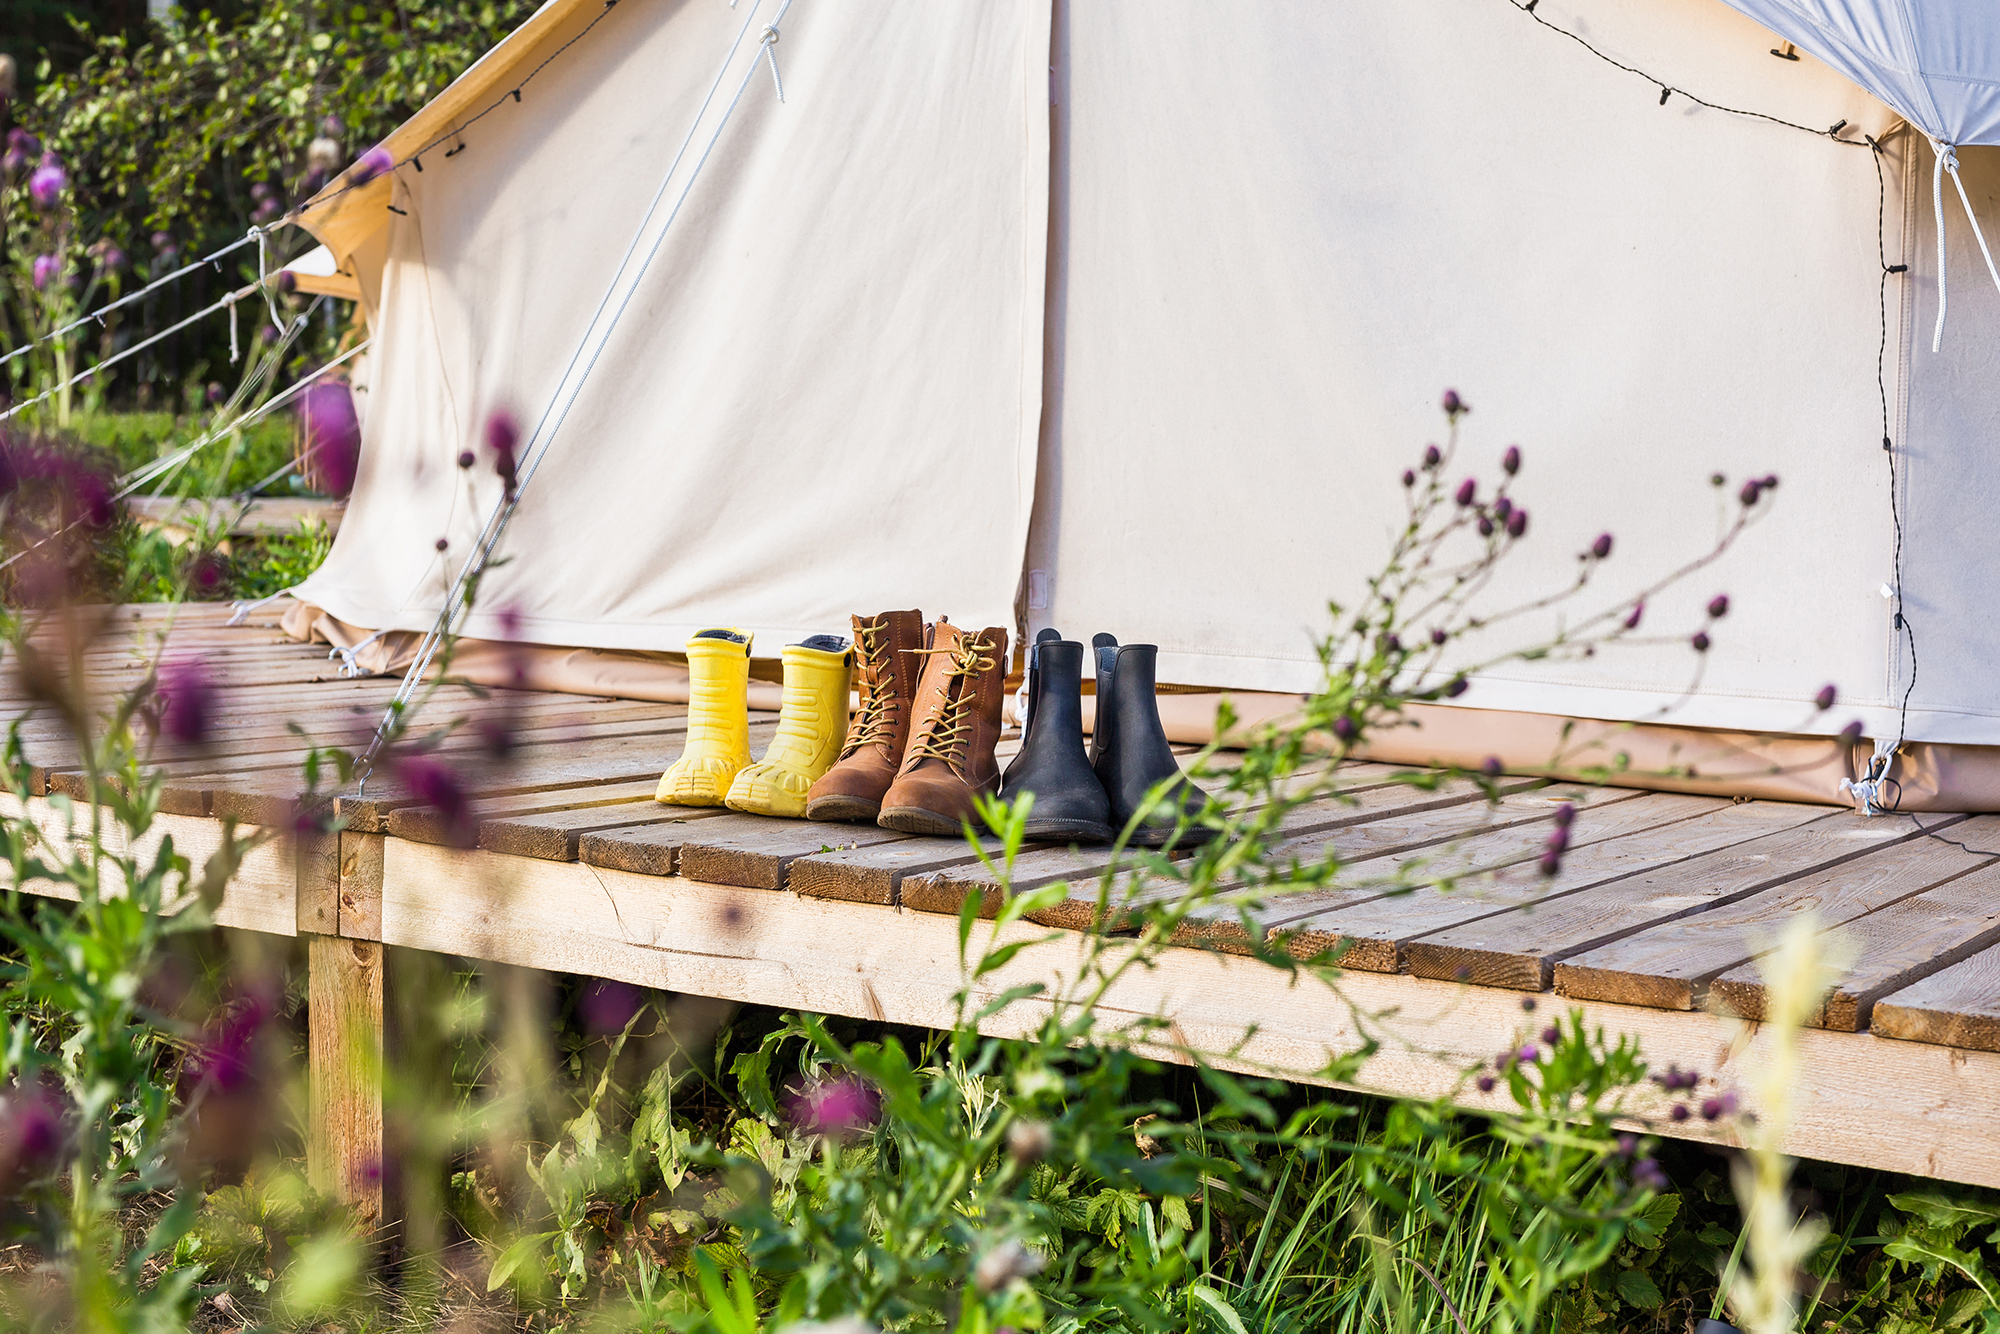 Bell tent with decking with a row of outdoor boots and bright yellow wellies lined up in front of the tent entrance